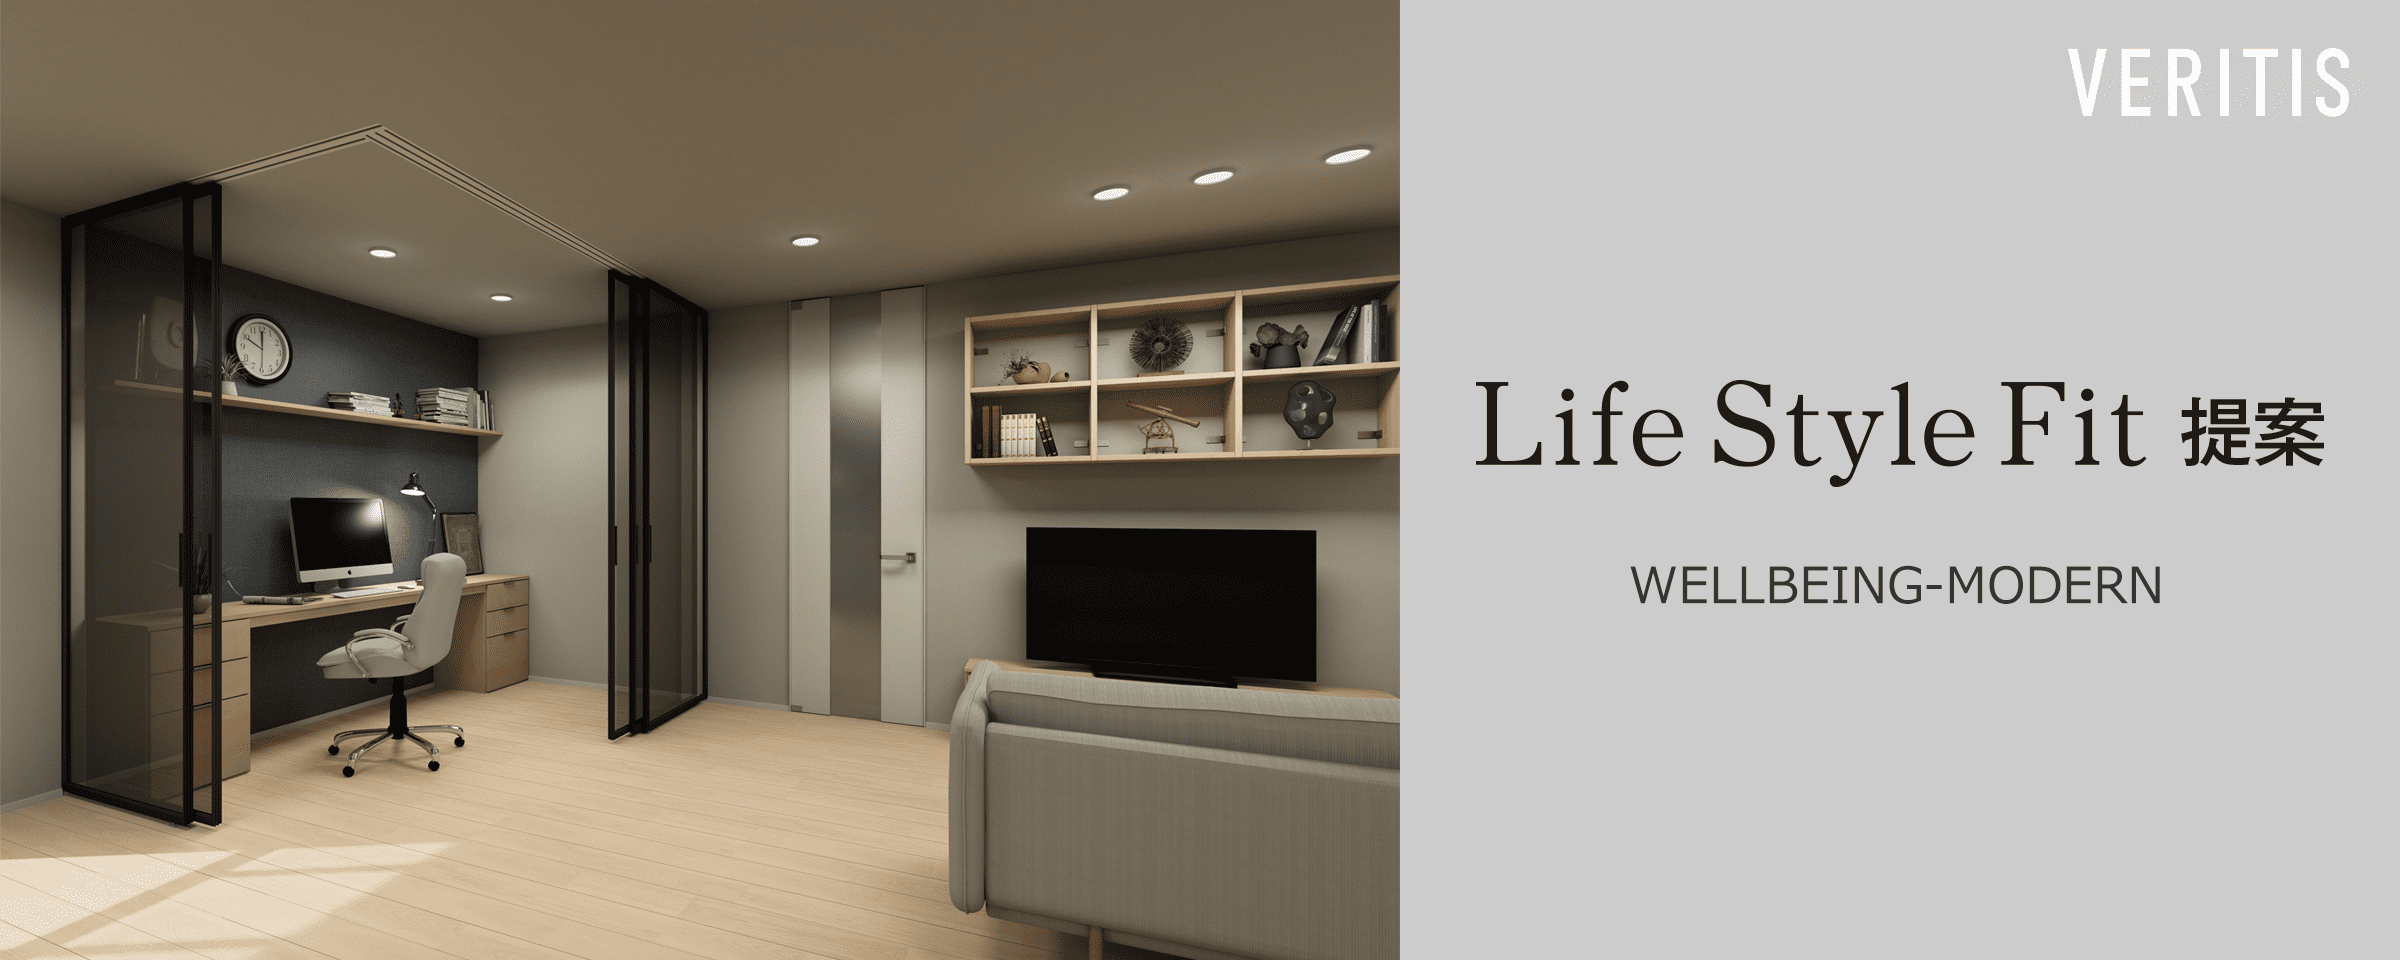 Life style Fit 提案 WELLBEING-MODERN